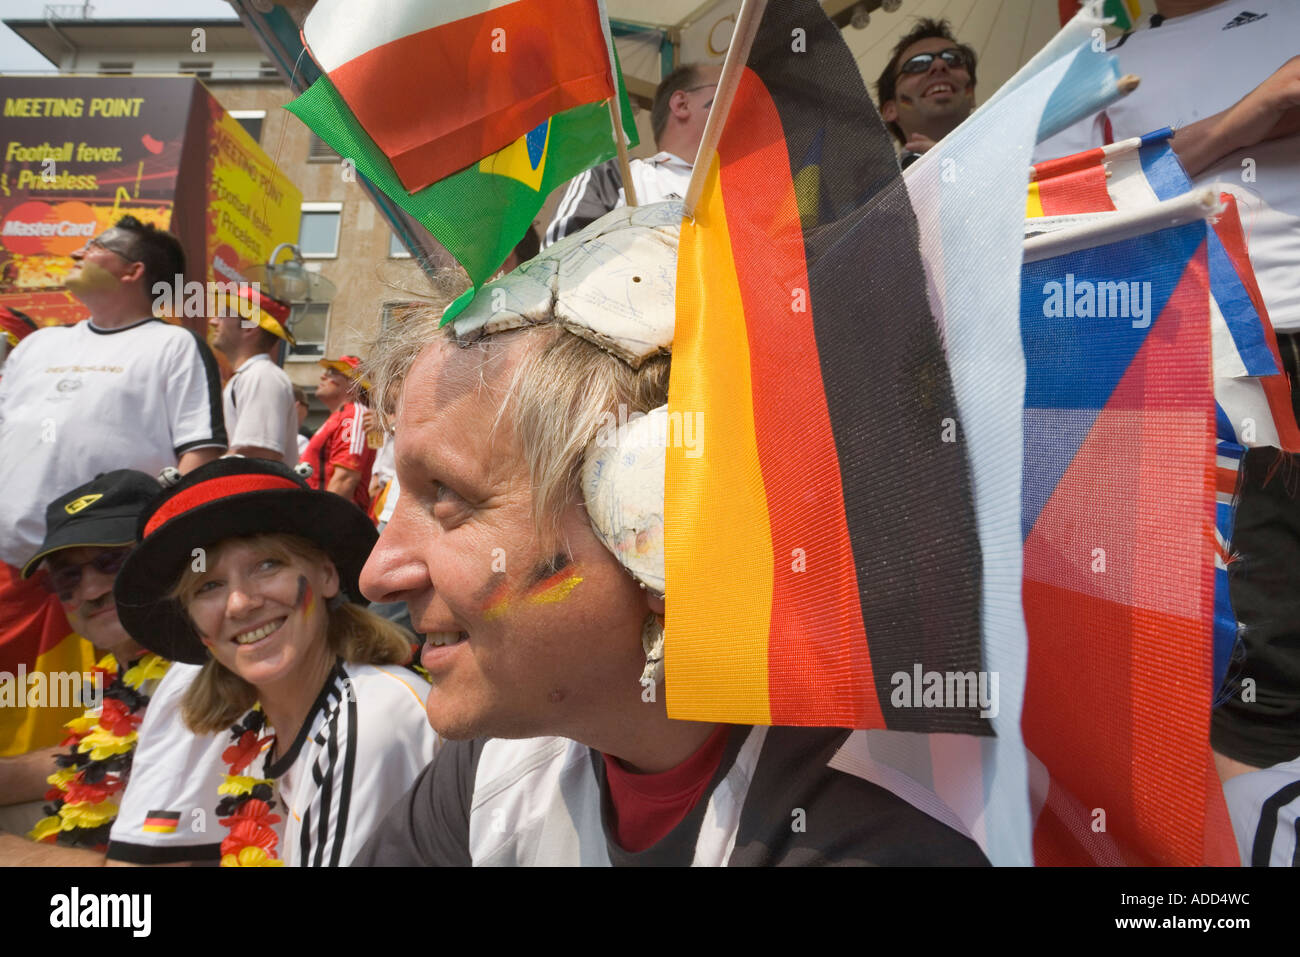 A football fan wearing a has been leather ball with various flags attached as a hat at a football world cup public viewing event Stock Photo